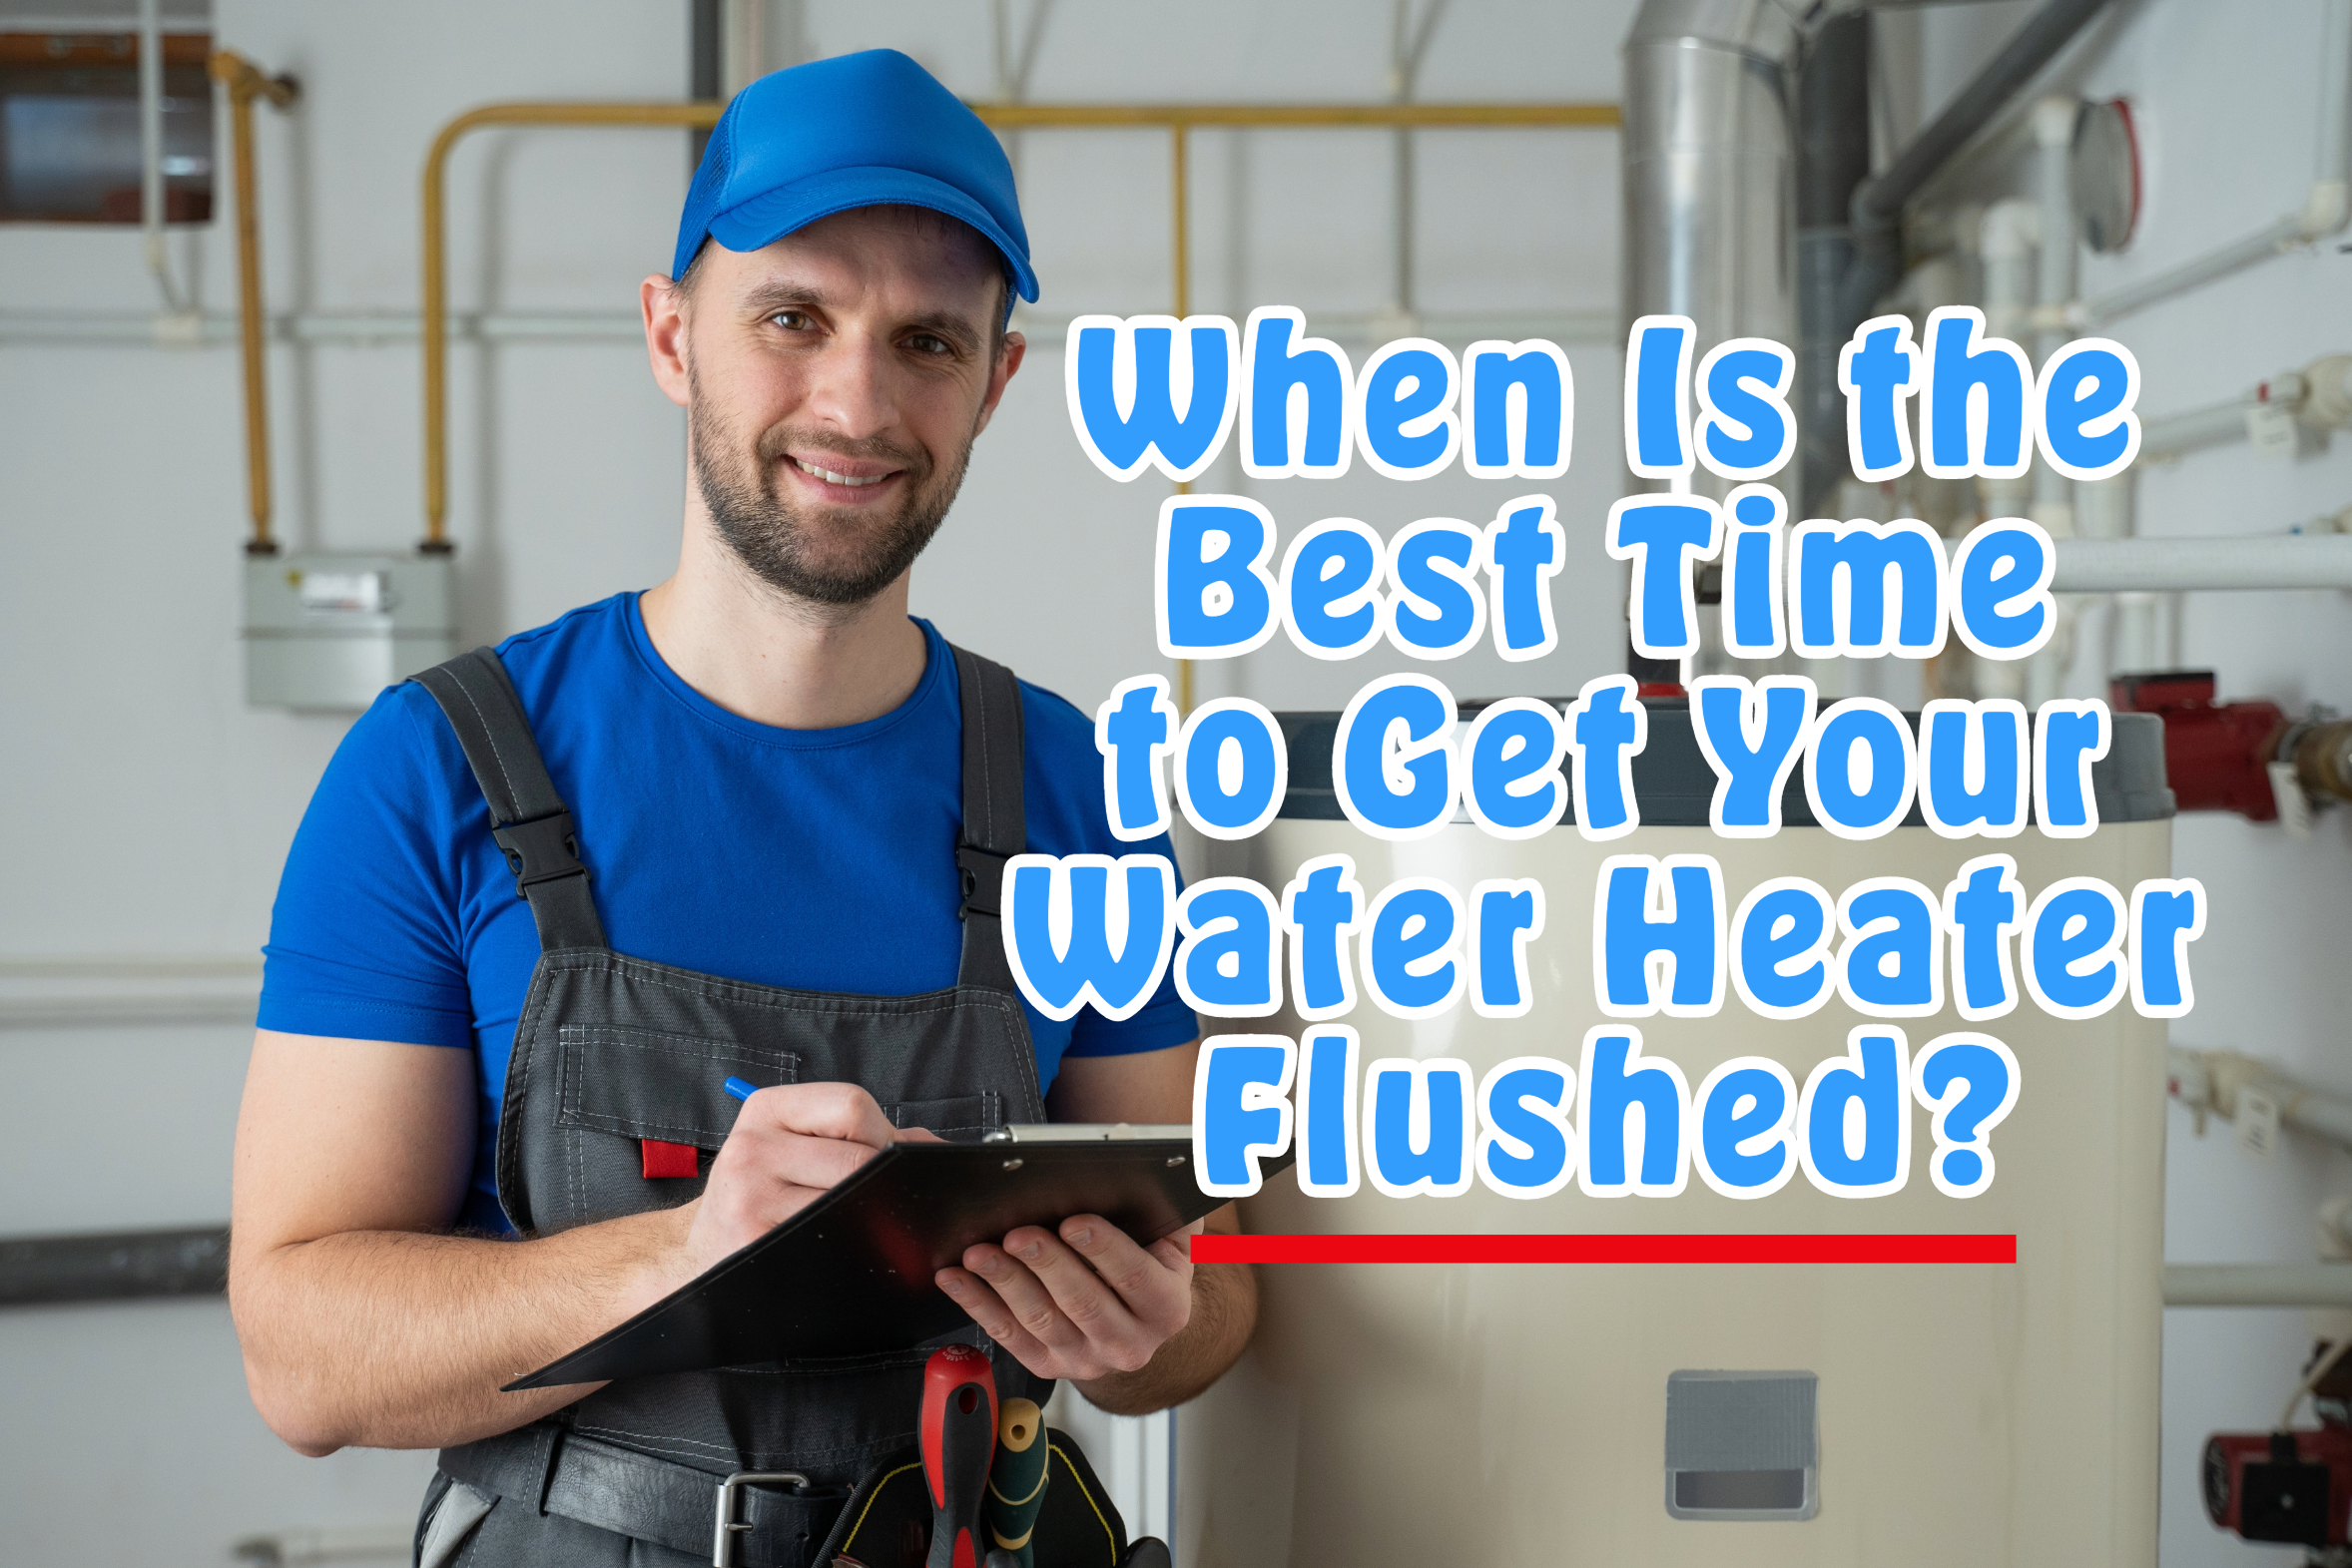 Wondering when to schedule your water heater flush? Learn why spring emerges as the best time for this essential maintenance task and how it can extend the life of your system.